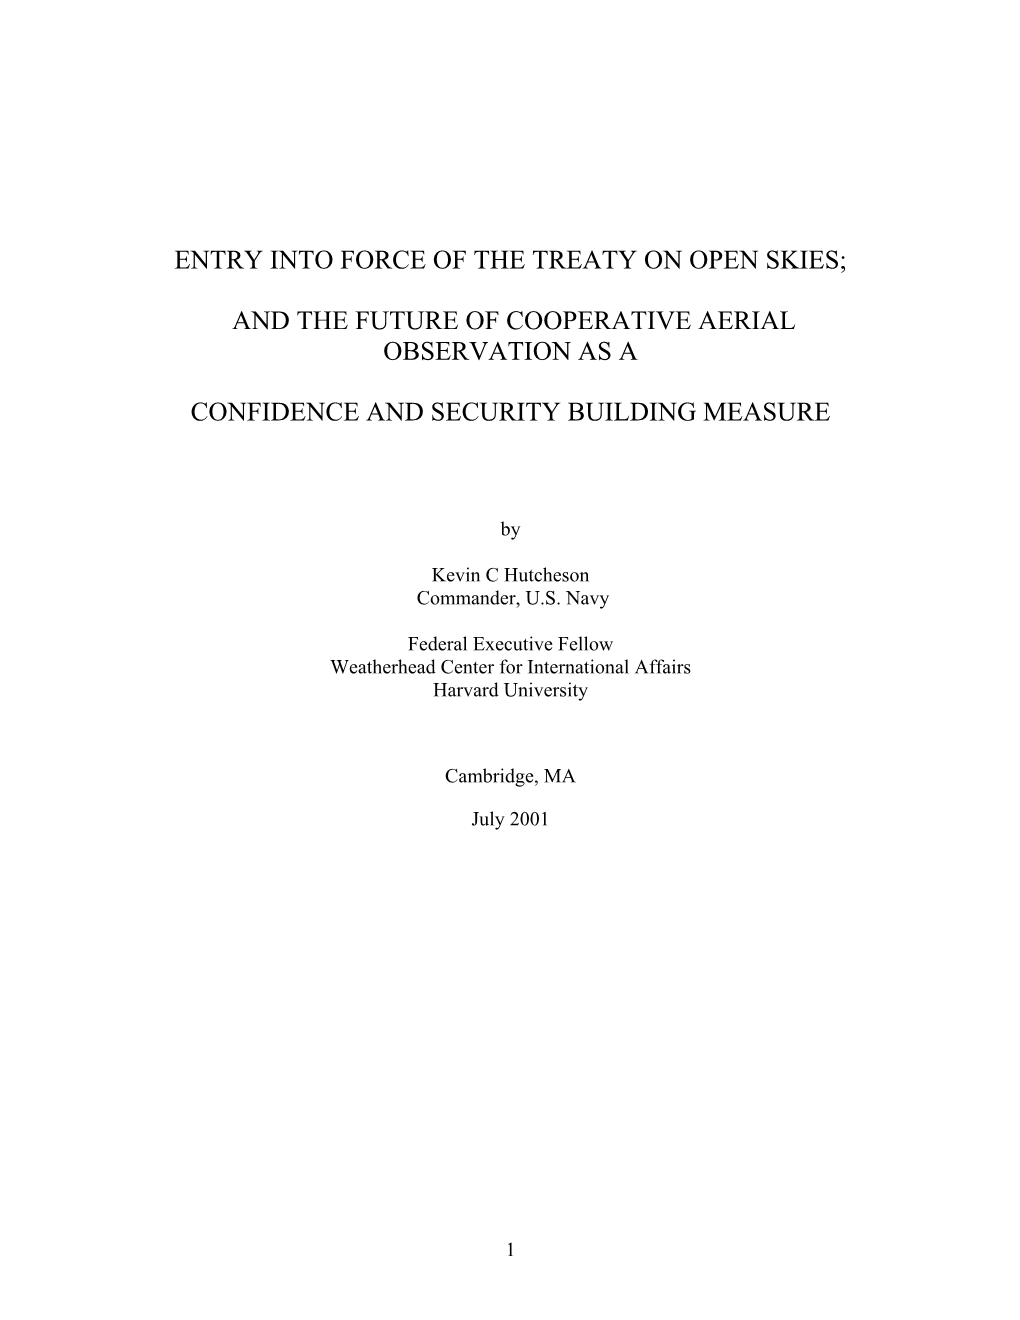 Entry Into Force of the Treaty on Open Skies; And